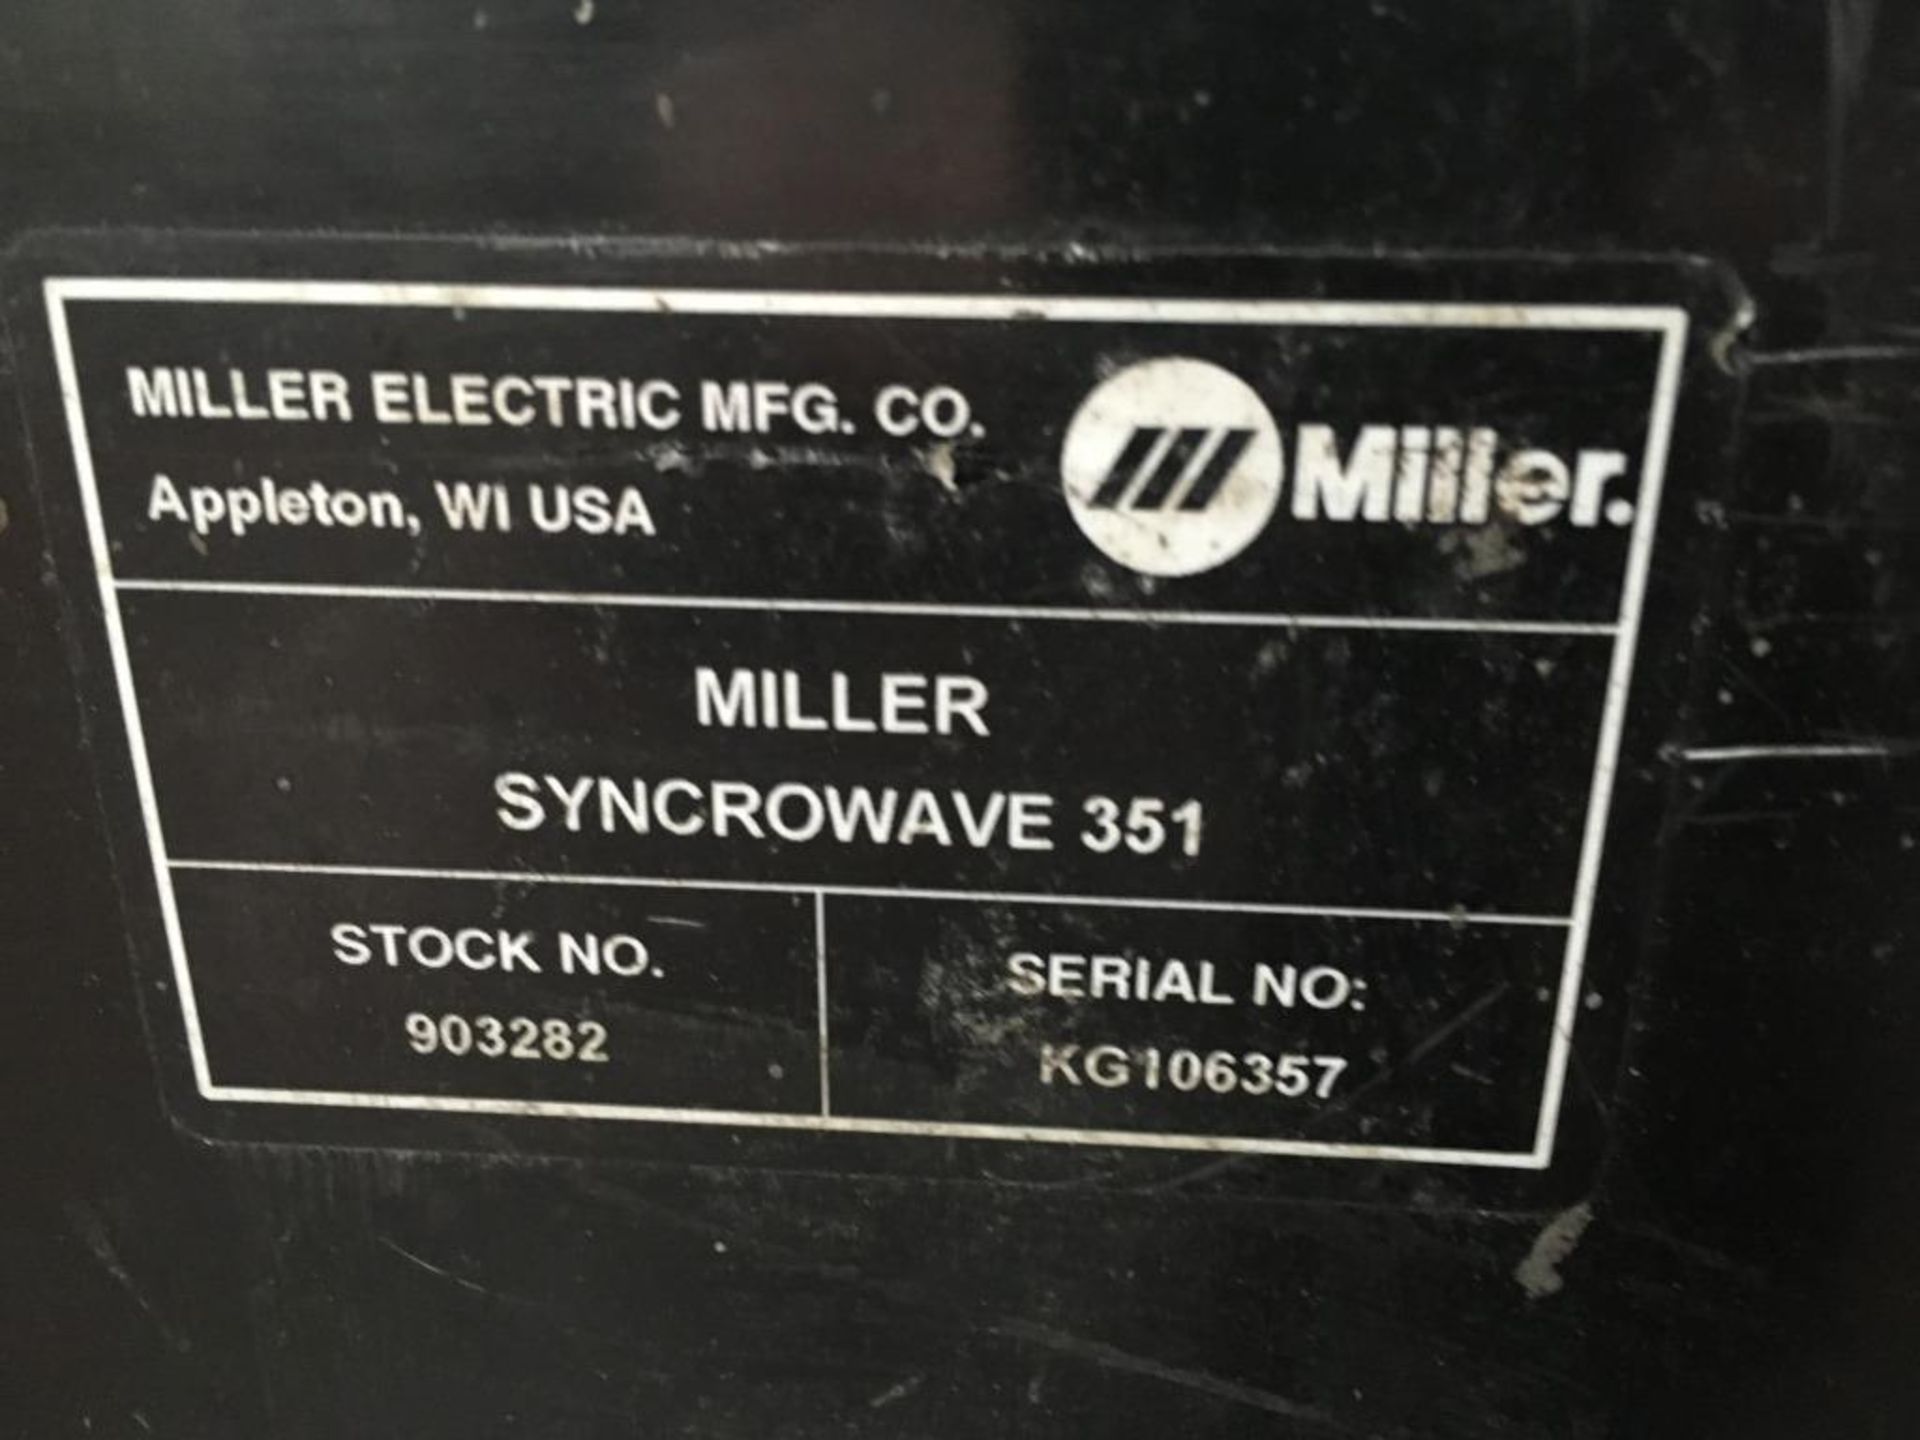 Miller Syncrowave 351 ACDC welding power source, Serial No. KG106357, with TA XC600 water cooler - Bild 3 aus 7